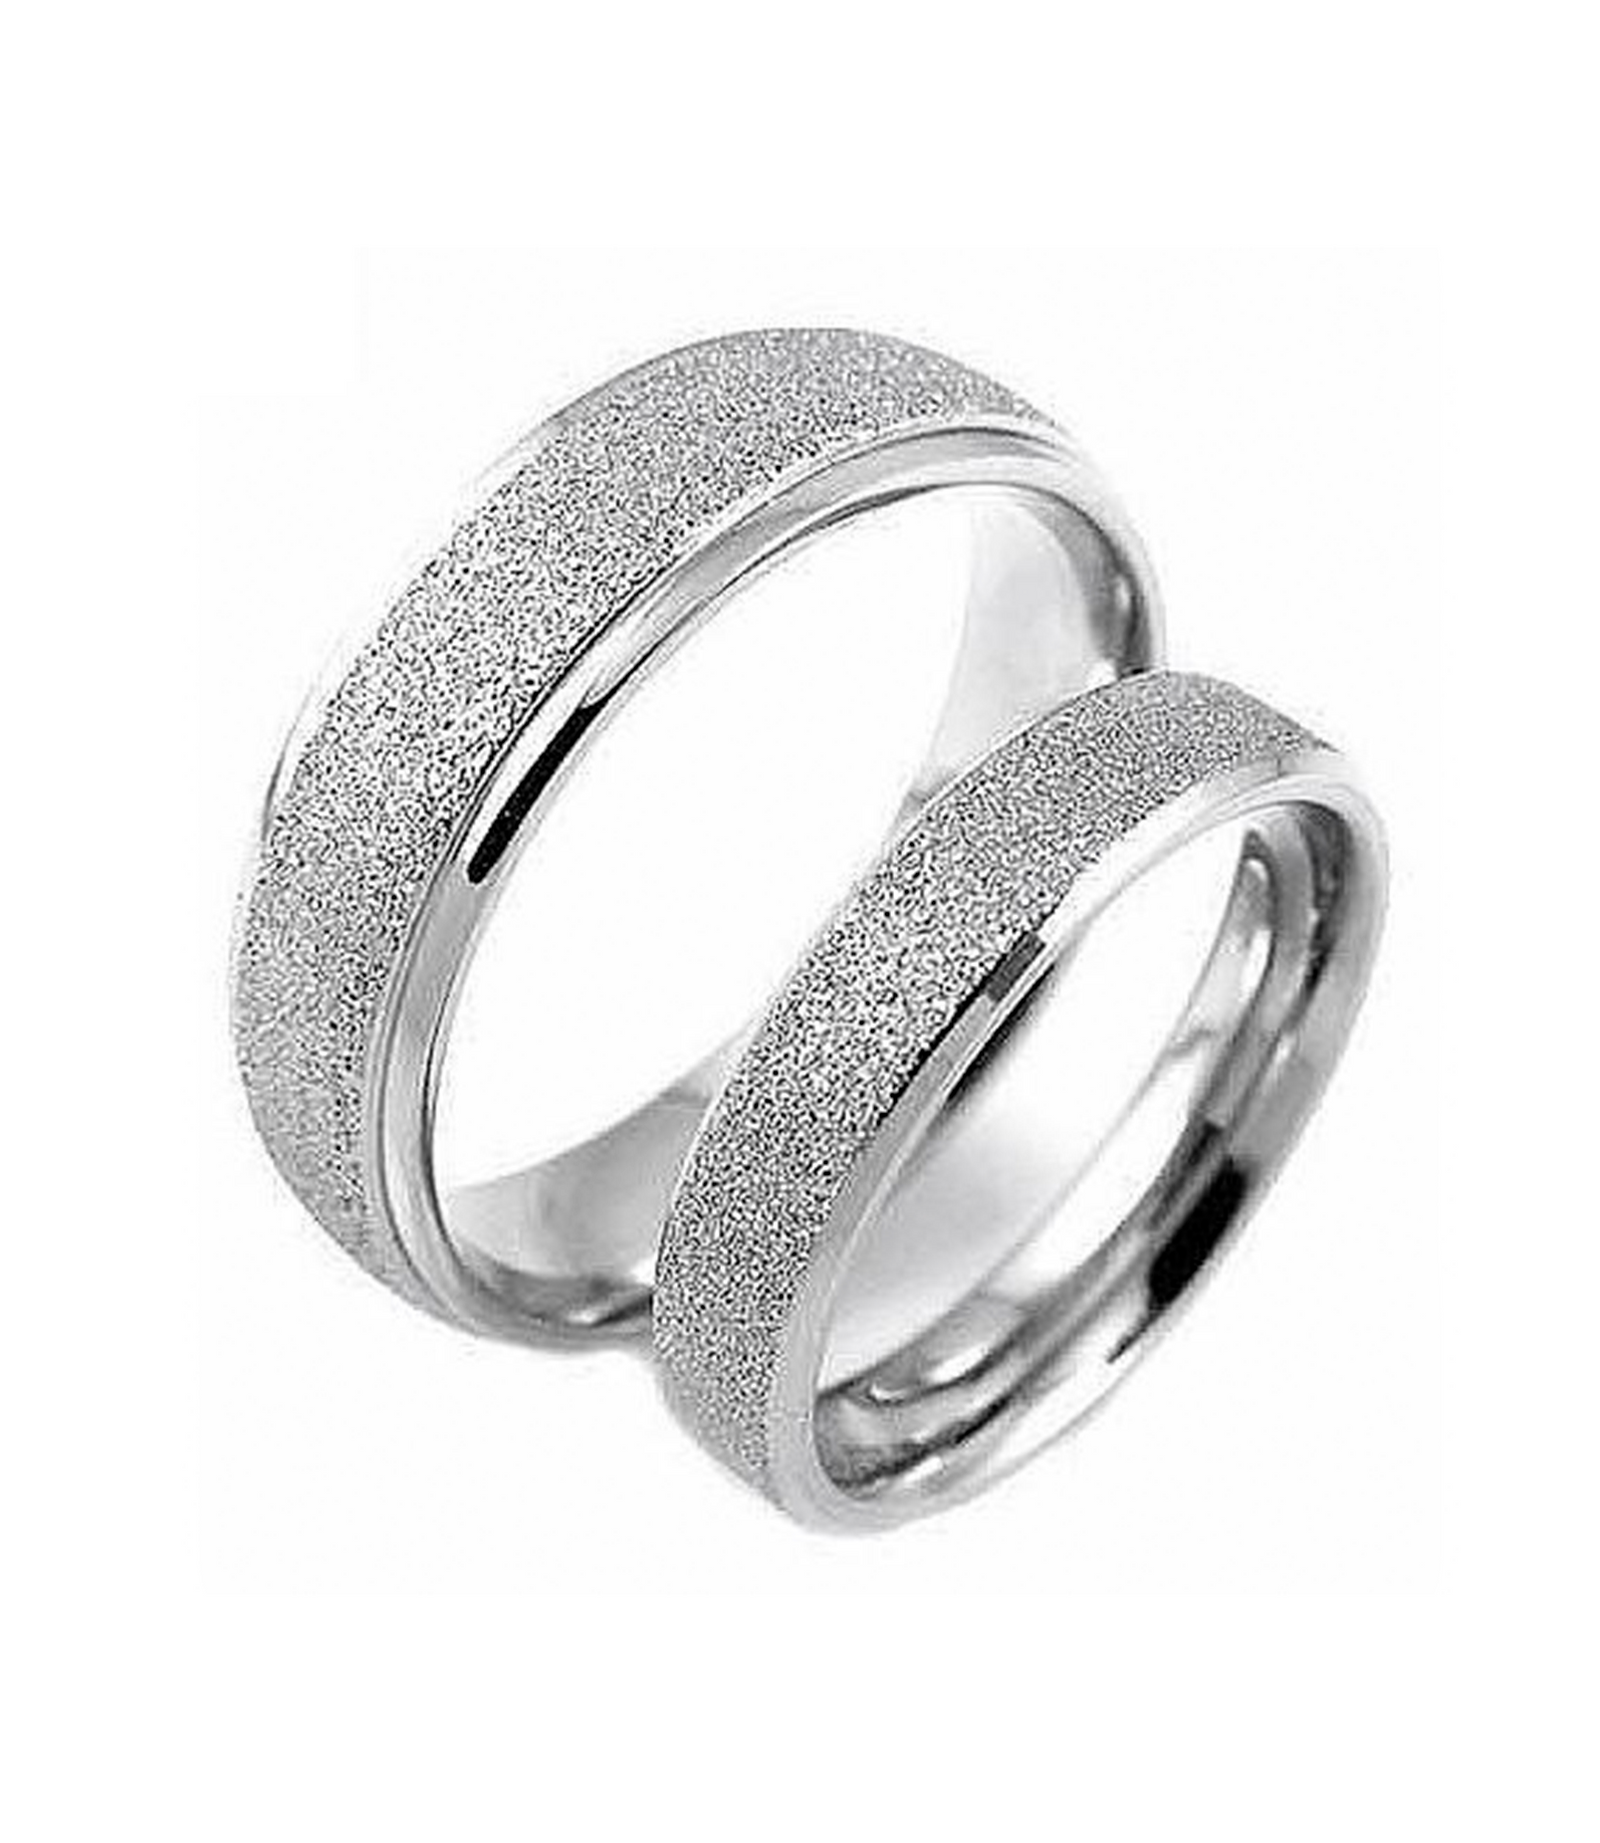 Silver Matte Titanium Couple Ring - Zoey - Zoey Philippines